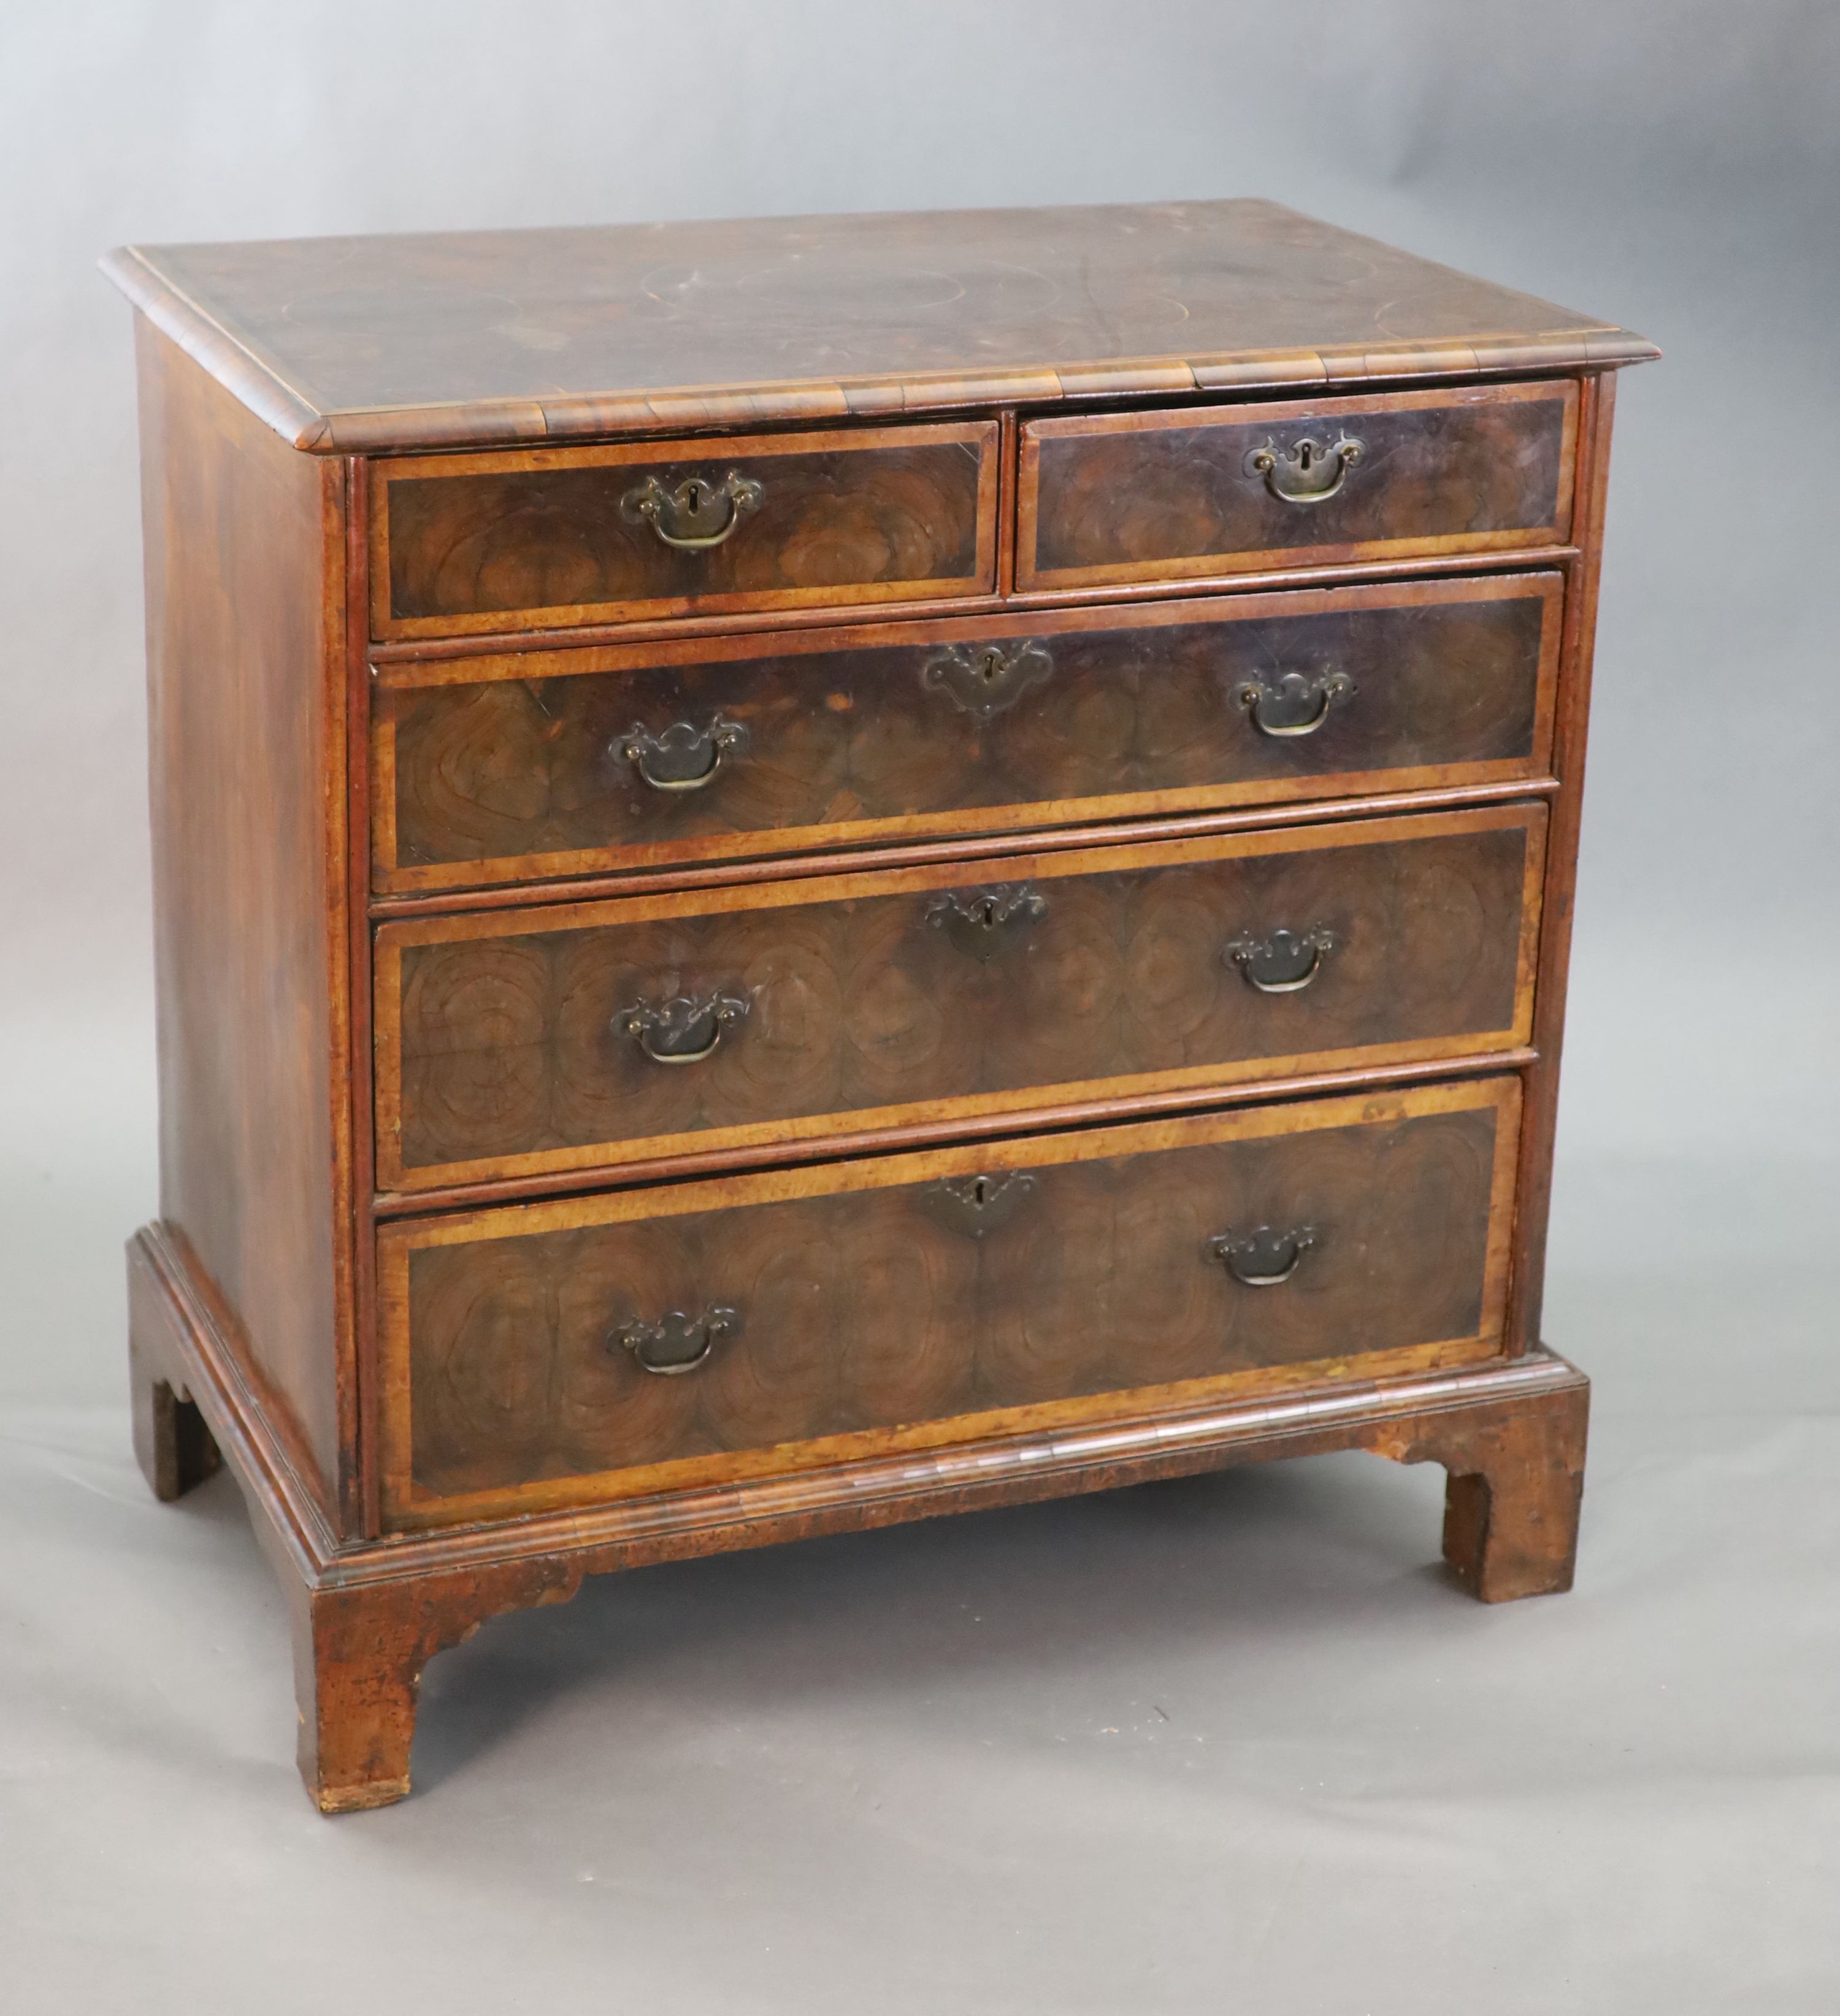 An early 18th century oyster veneered chest, W.3ft .5in. D.1ft 10in. H.3ft 1in.